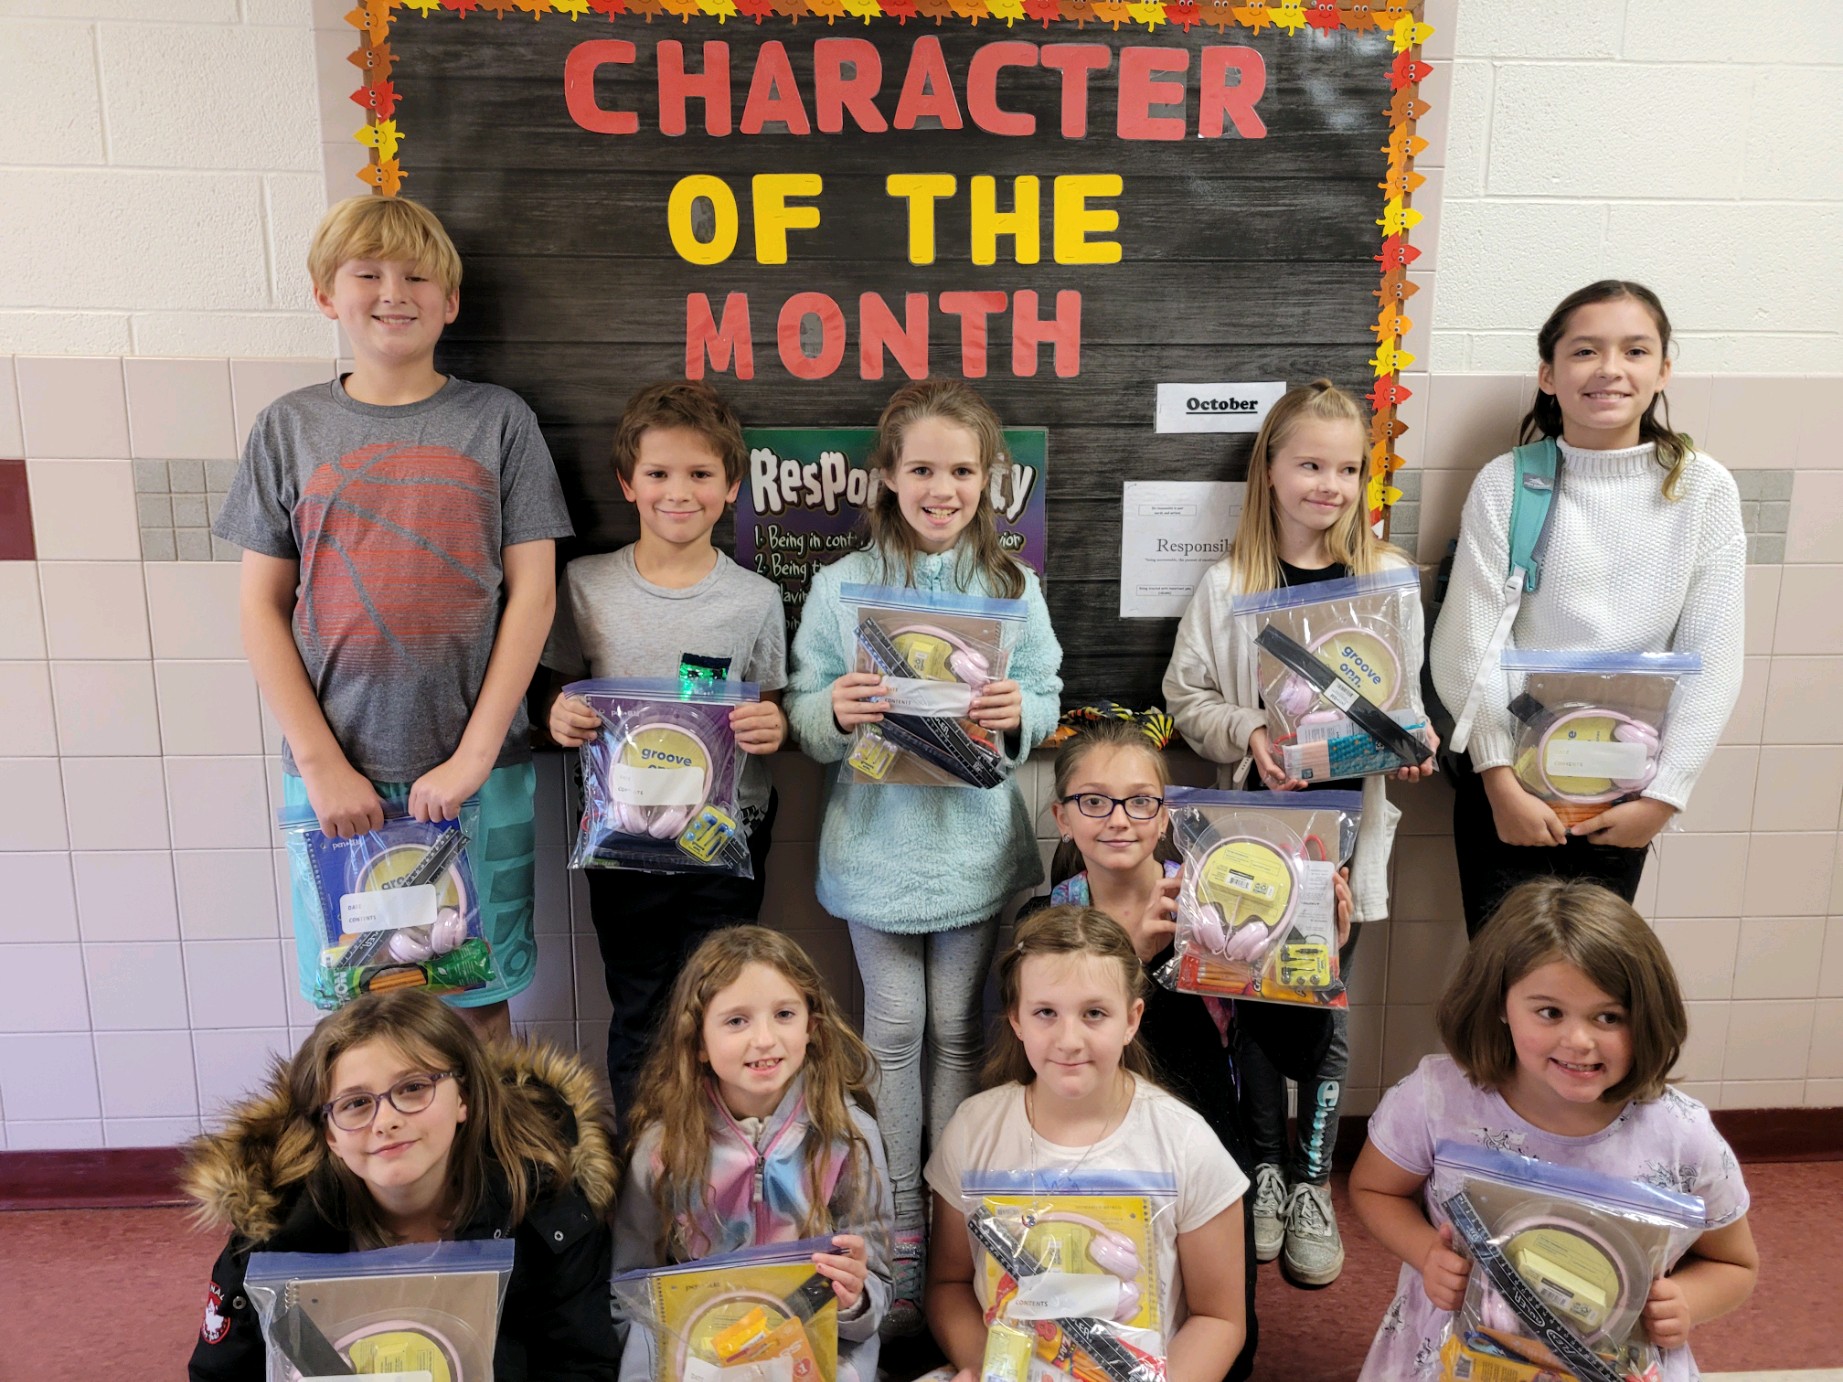 September Character Education Winners for "Caring"